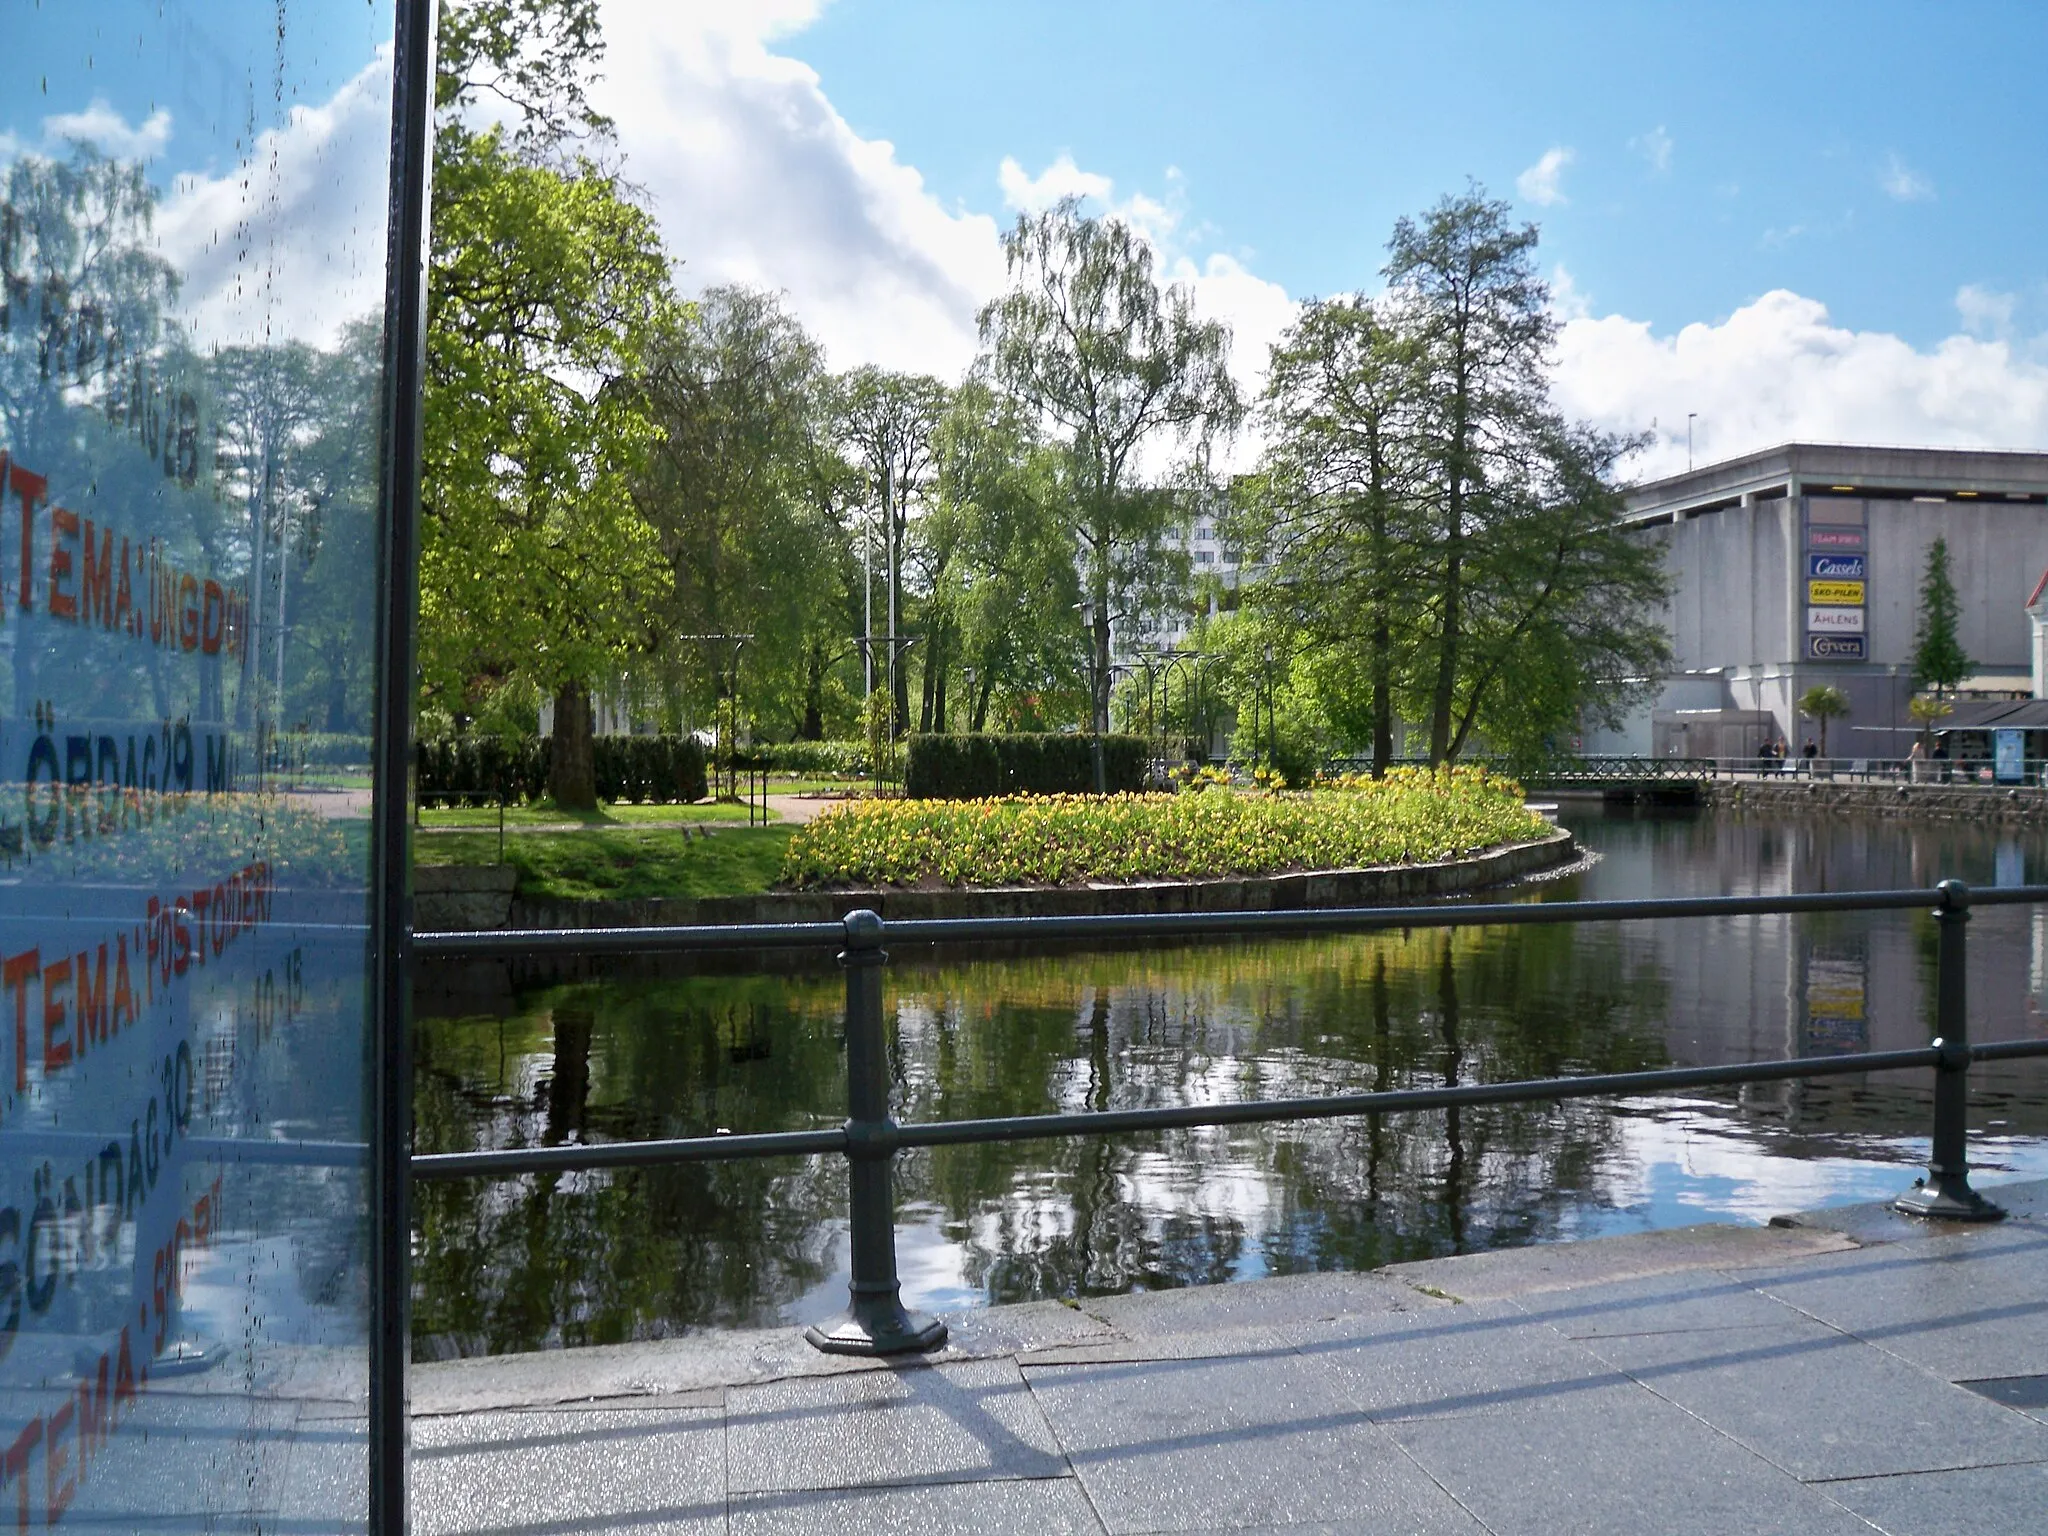 Photo showing: A curve of Viskan (Whisper River) in the city of Borås, Sweden.